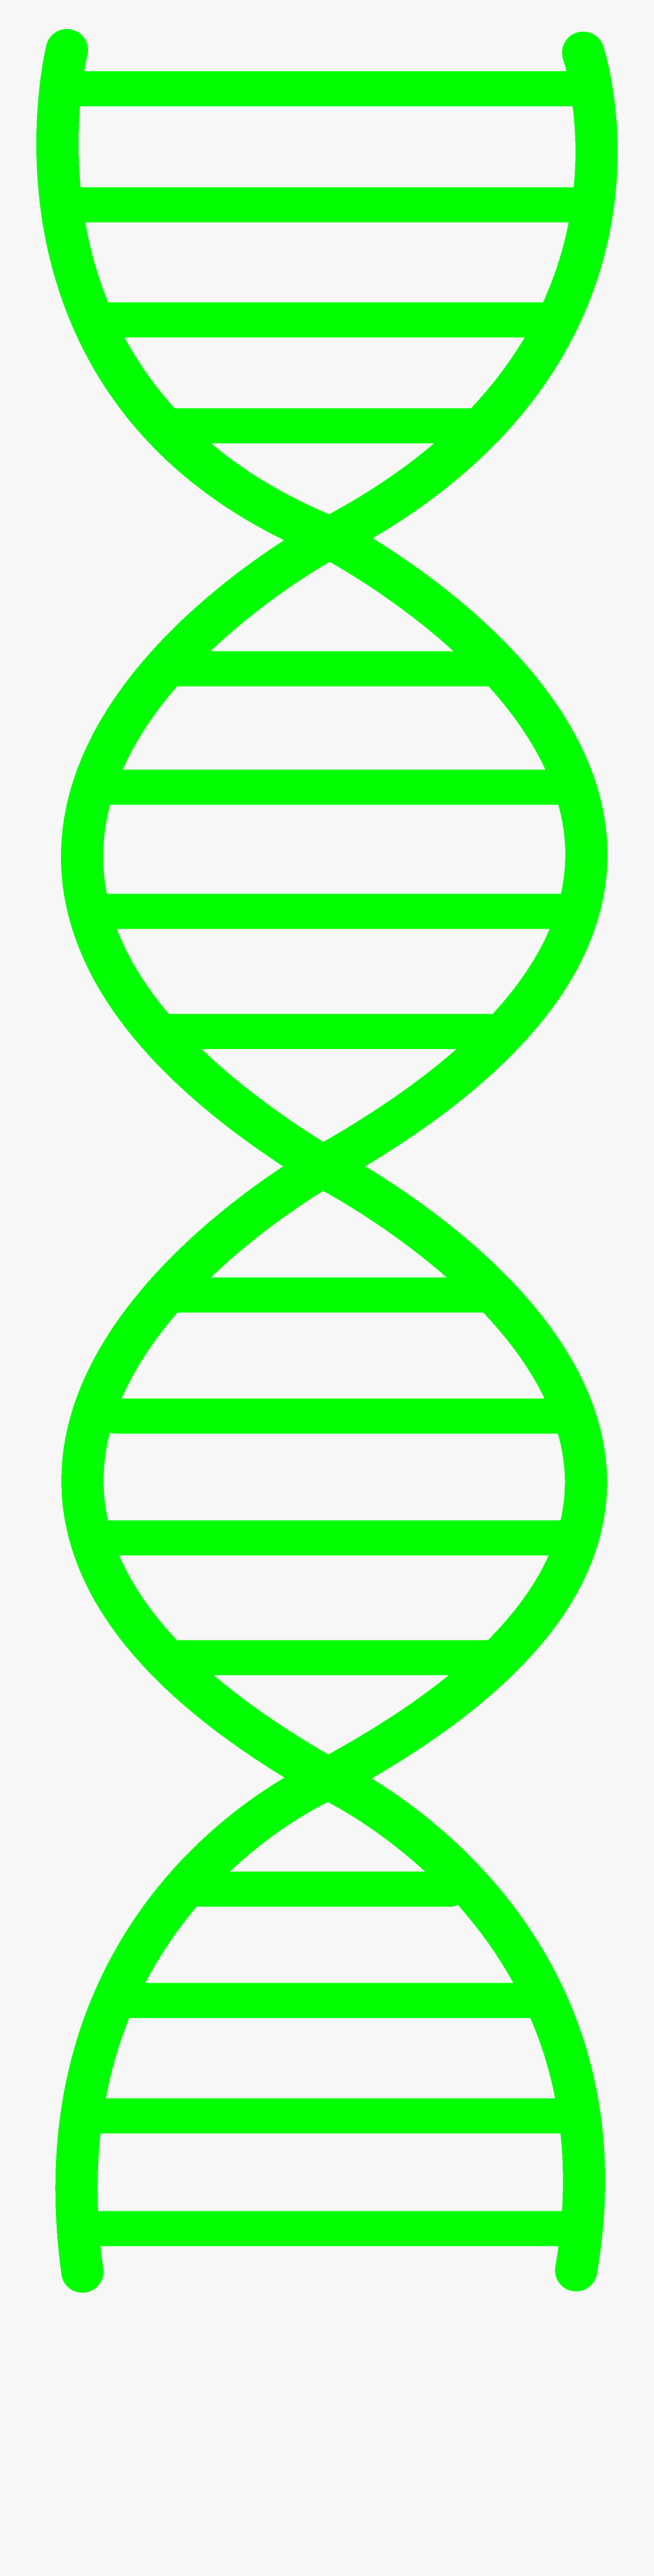 Green Dna Design - Simple Dna Double Helix, Transparent Clipart